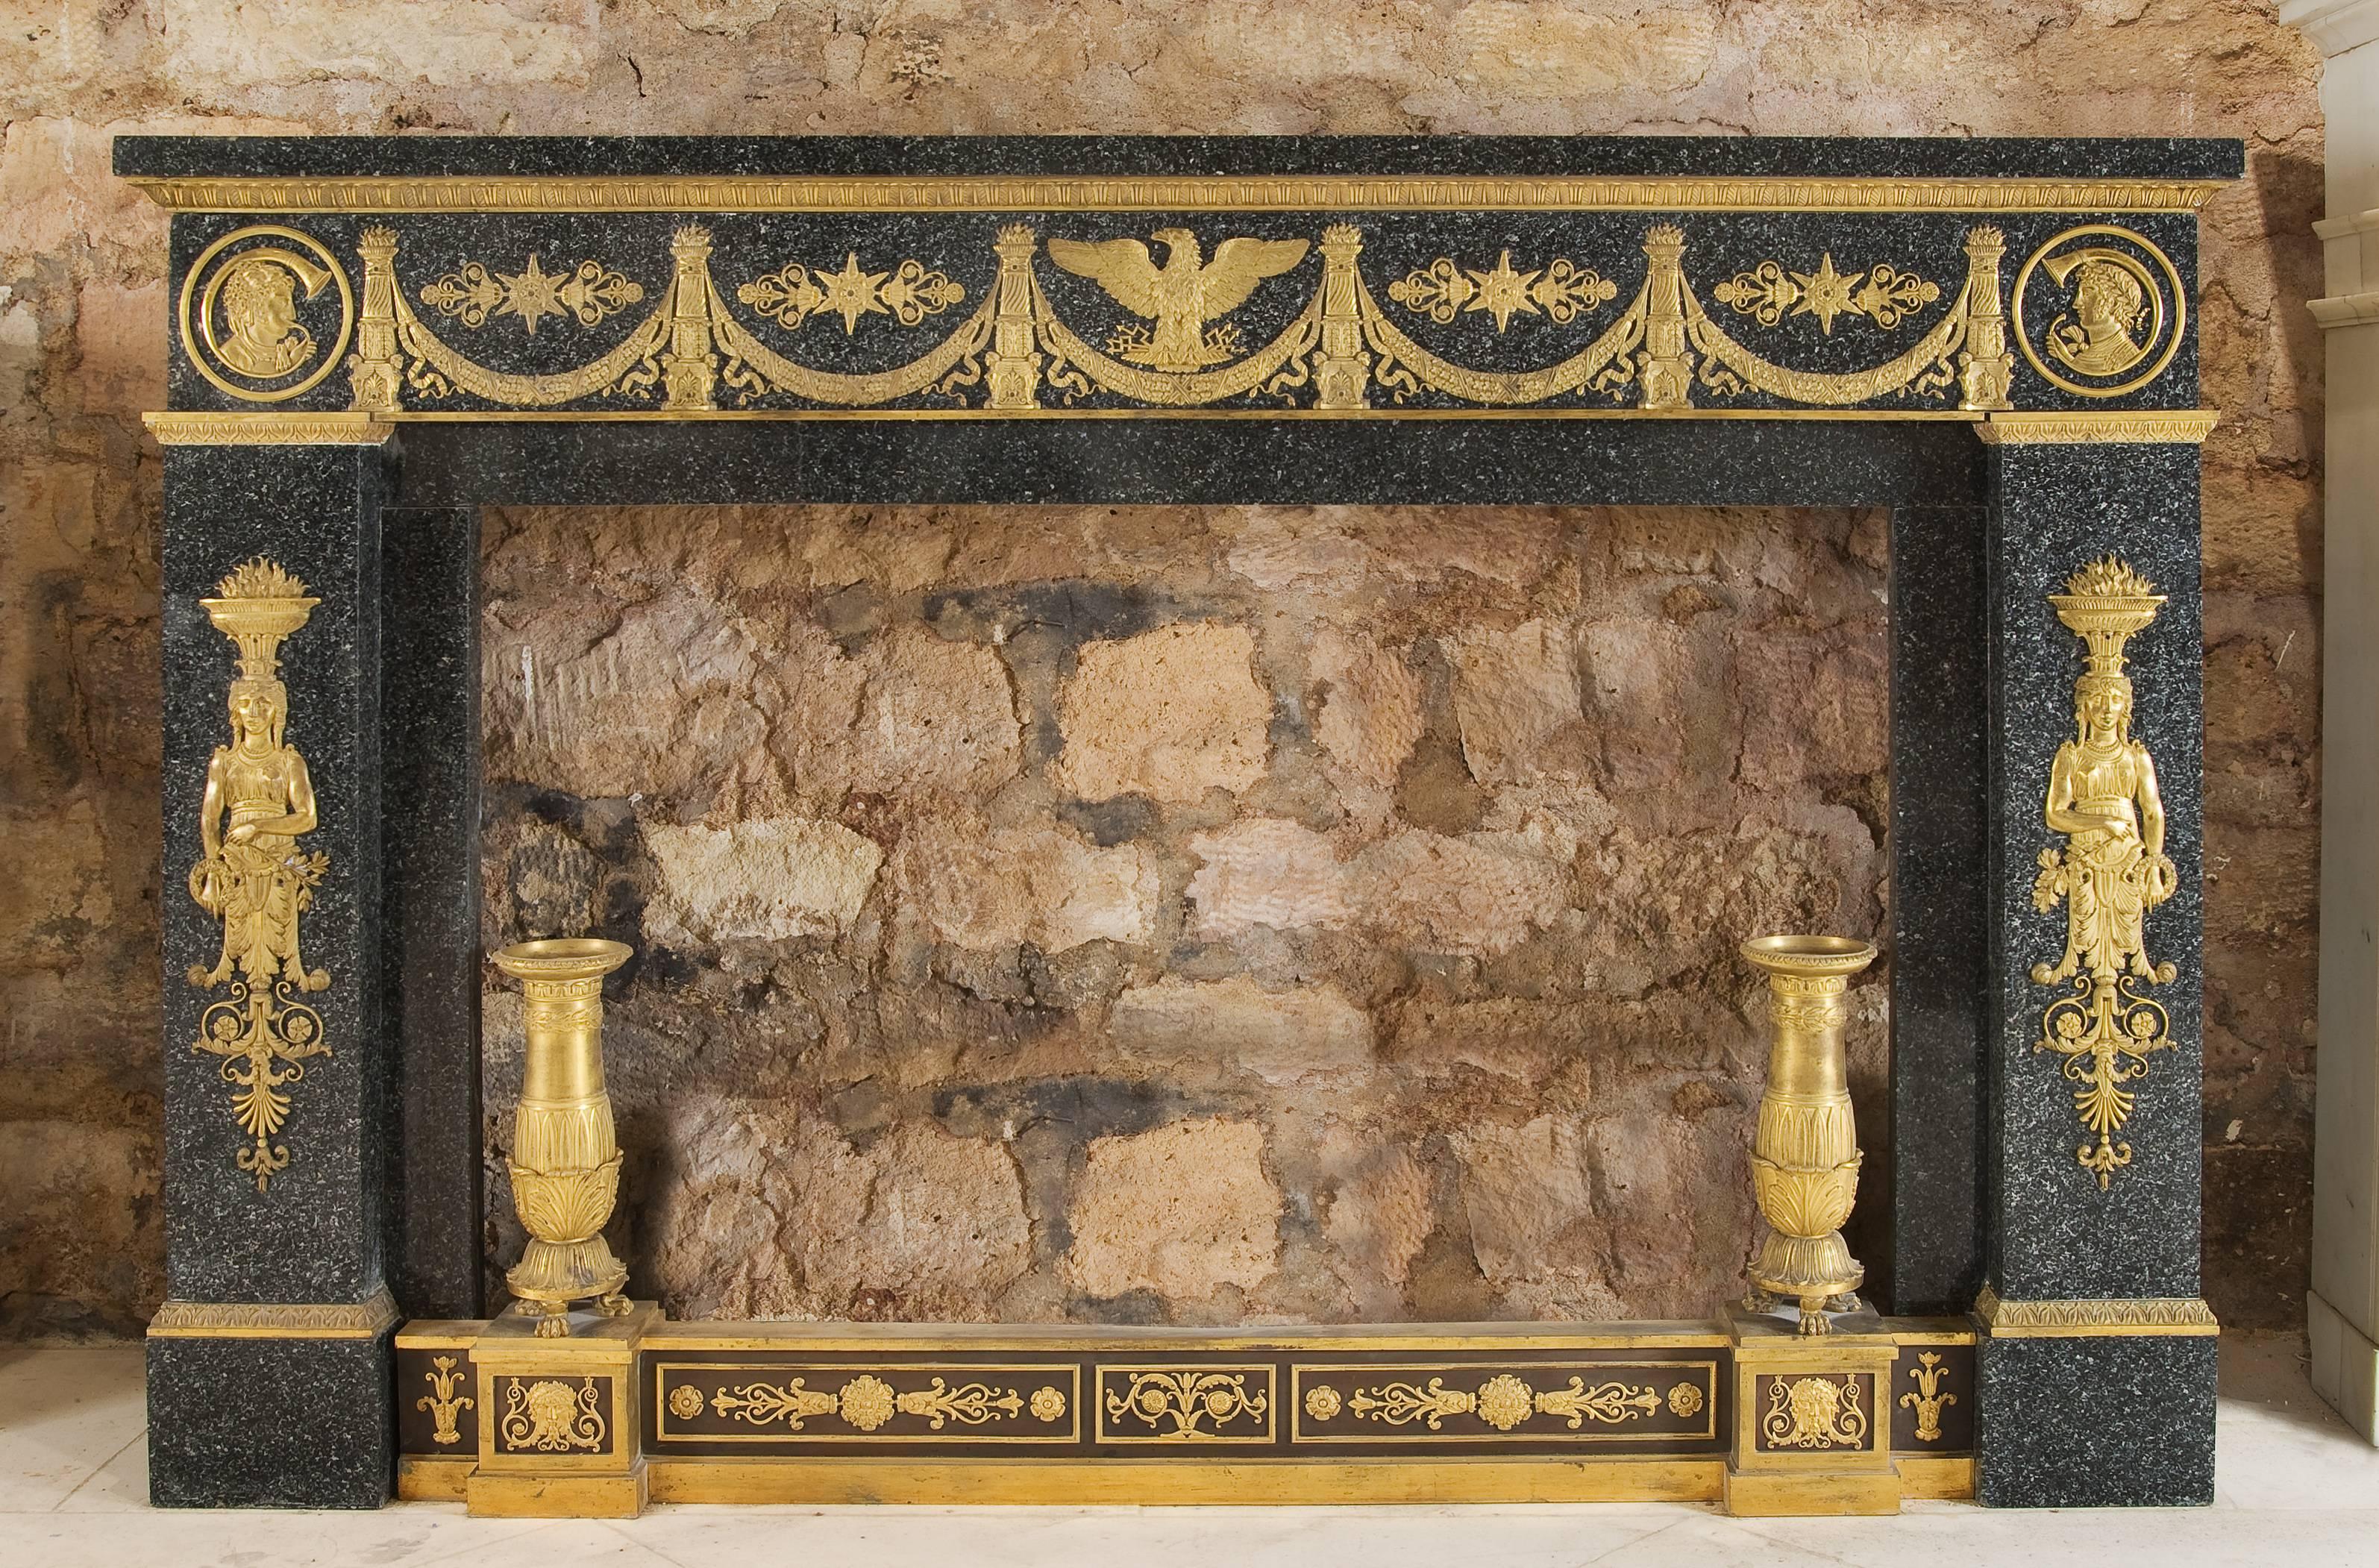 A grey marble fireplace with gilded bronze ornaments.
This mantel is dated from the early 19th century.
Twined with the one at the German Embassy rue de Lille in Paris, France.
A typical Empire style decoration with eagles, stars, flower garlands